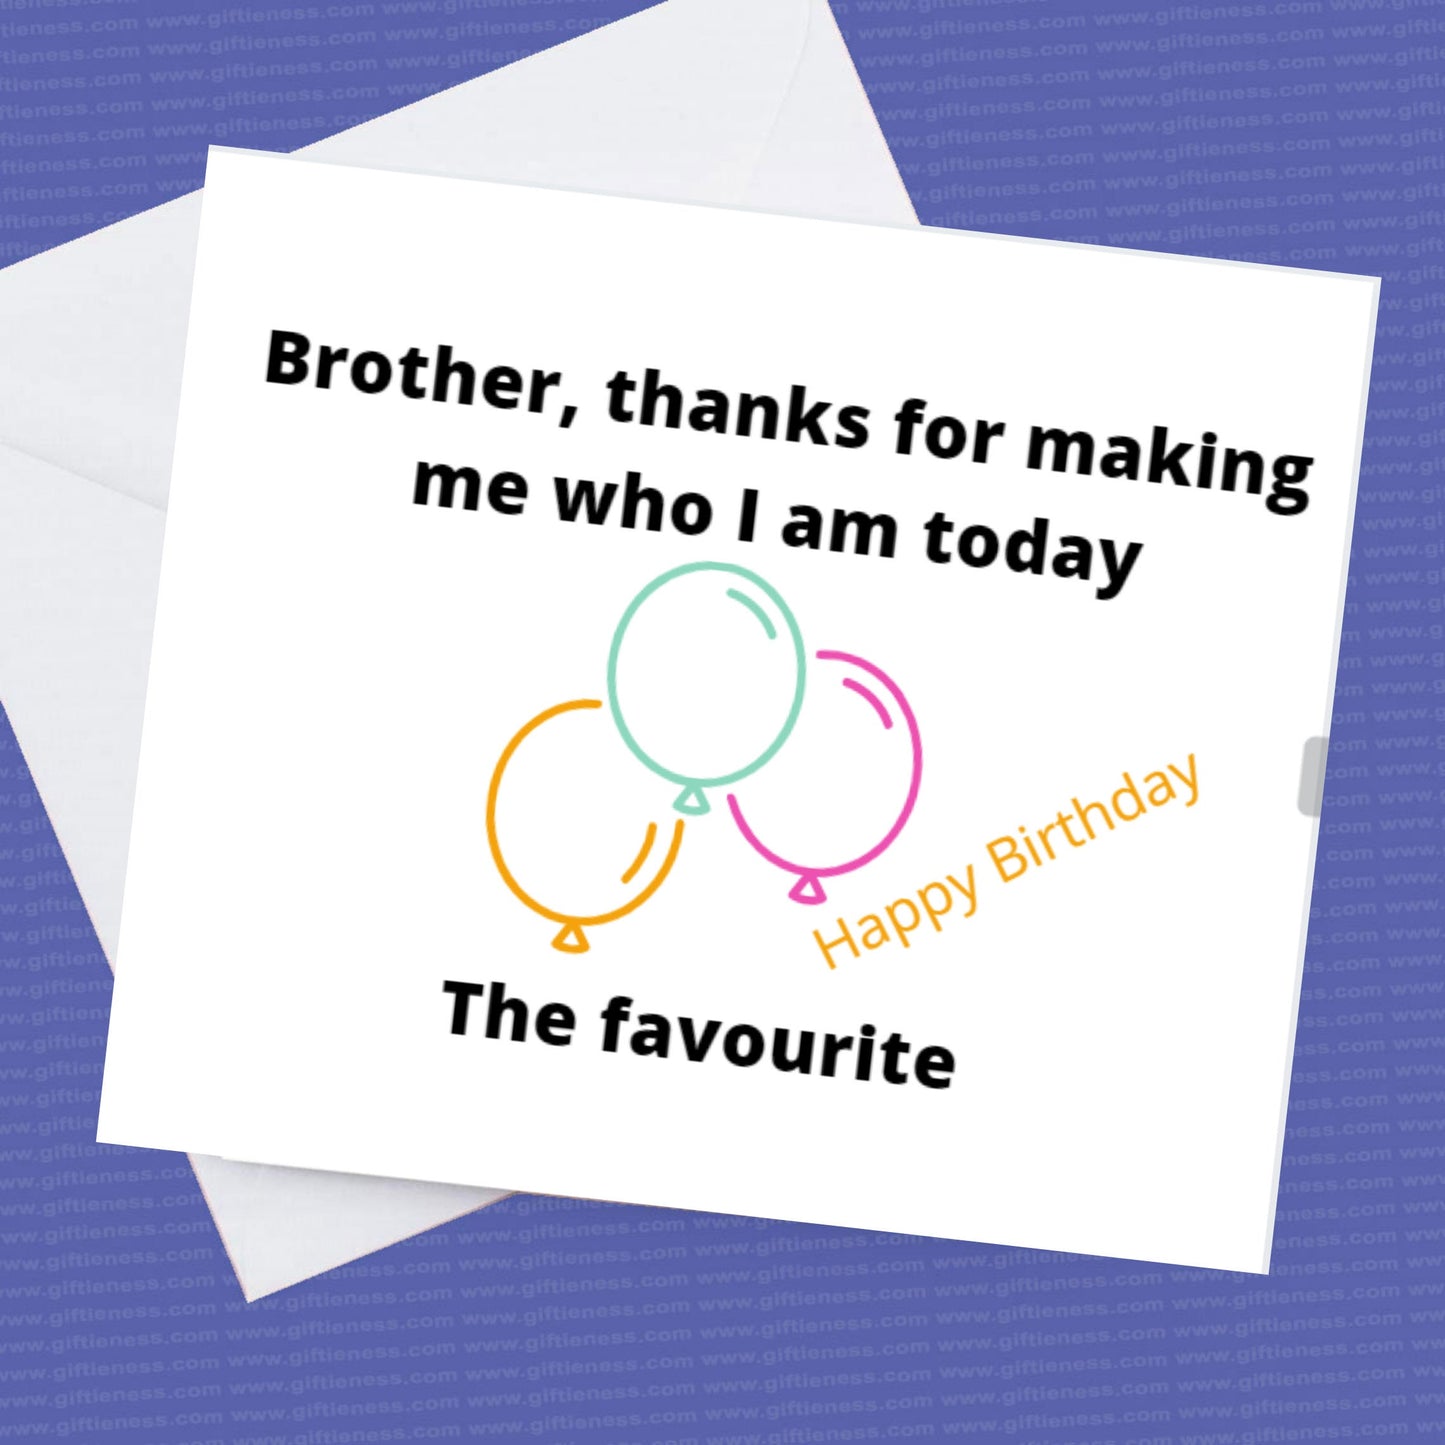 Brother Thanks for making me who I am today, The favourite - Happy Birthday